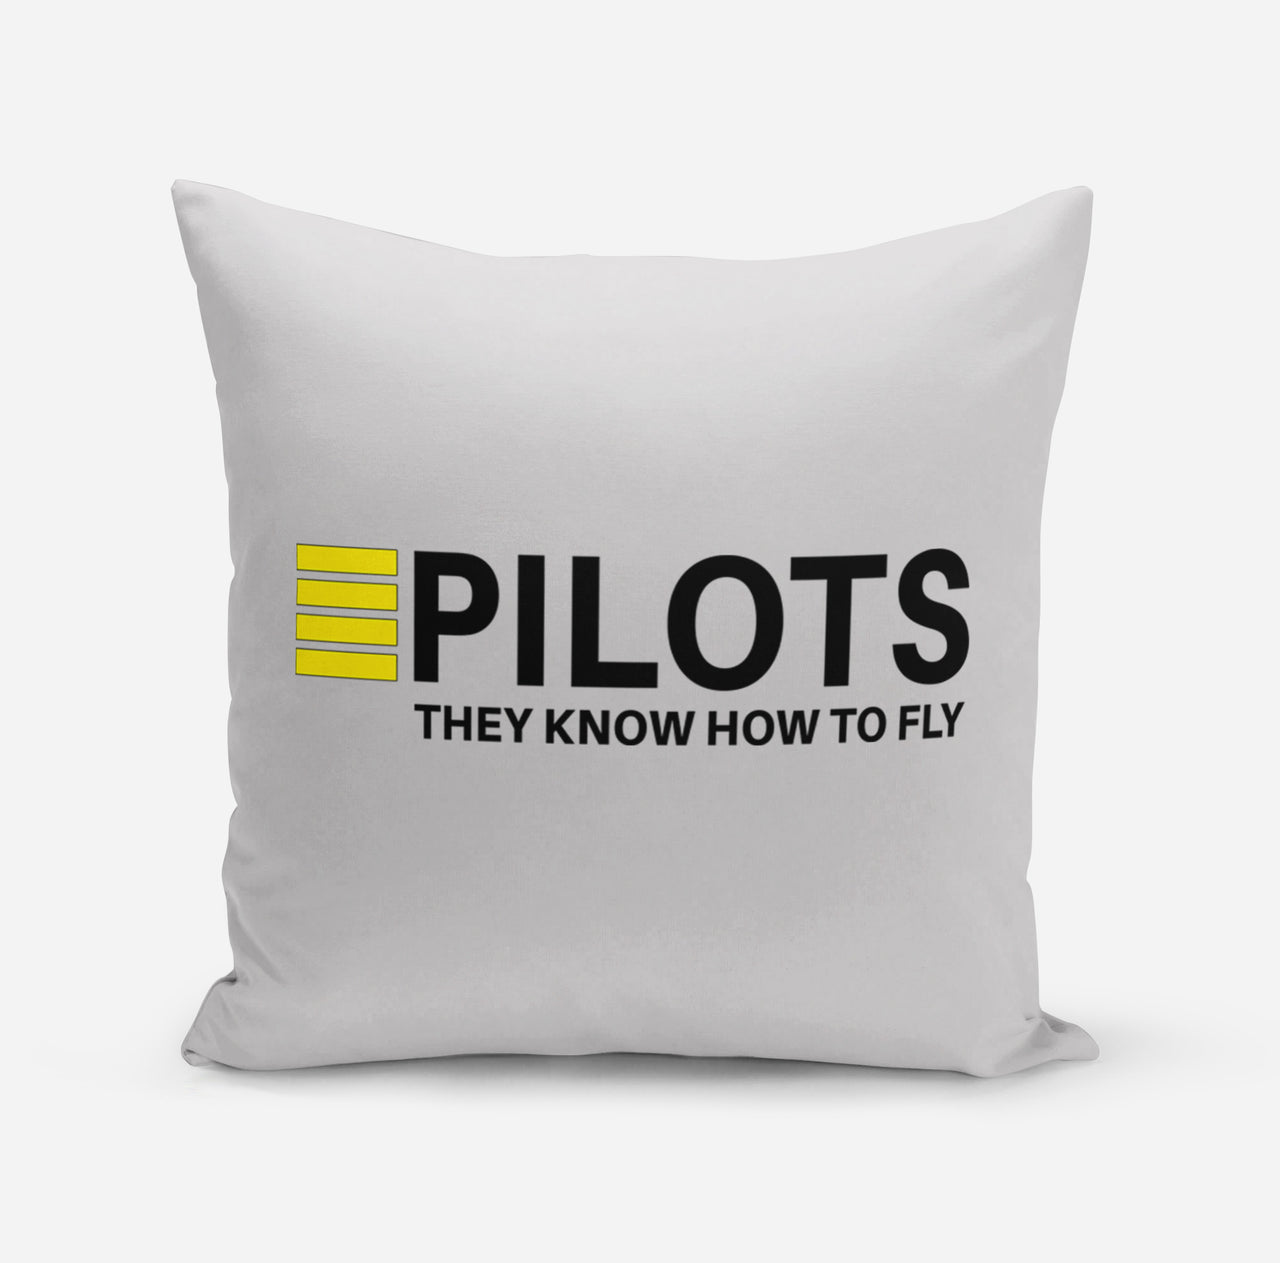 Pilots They Know How To Fly Designed Pillows